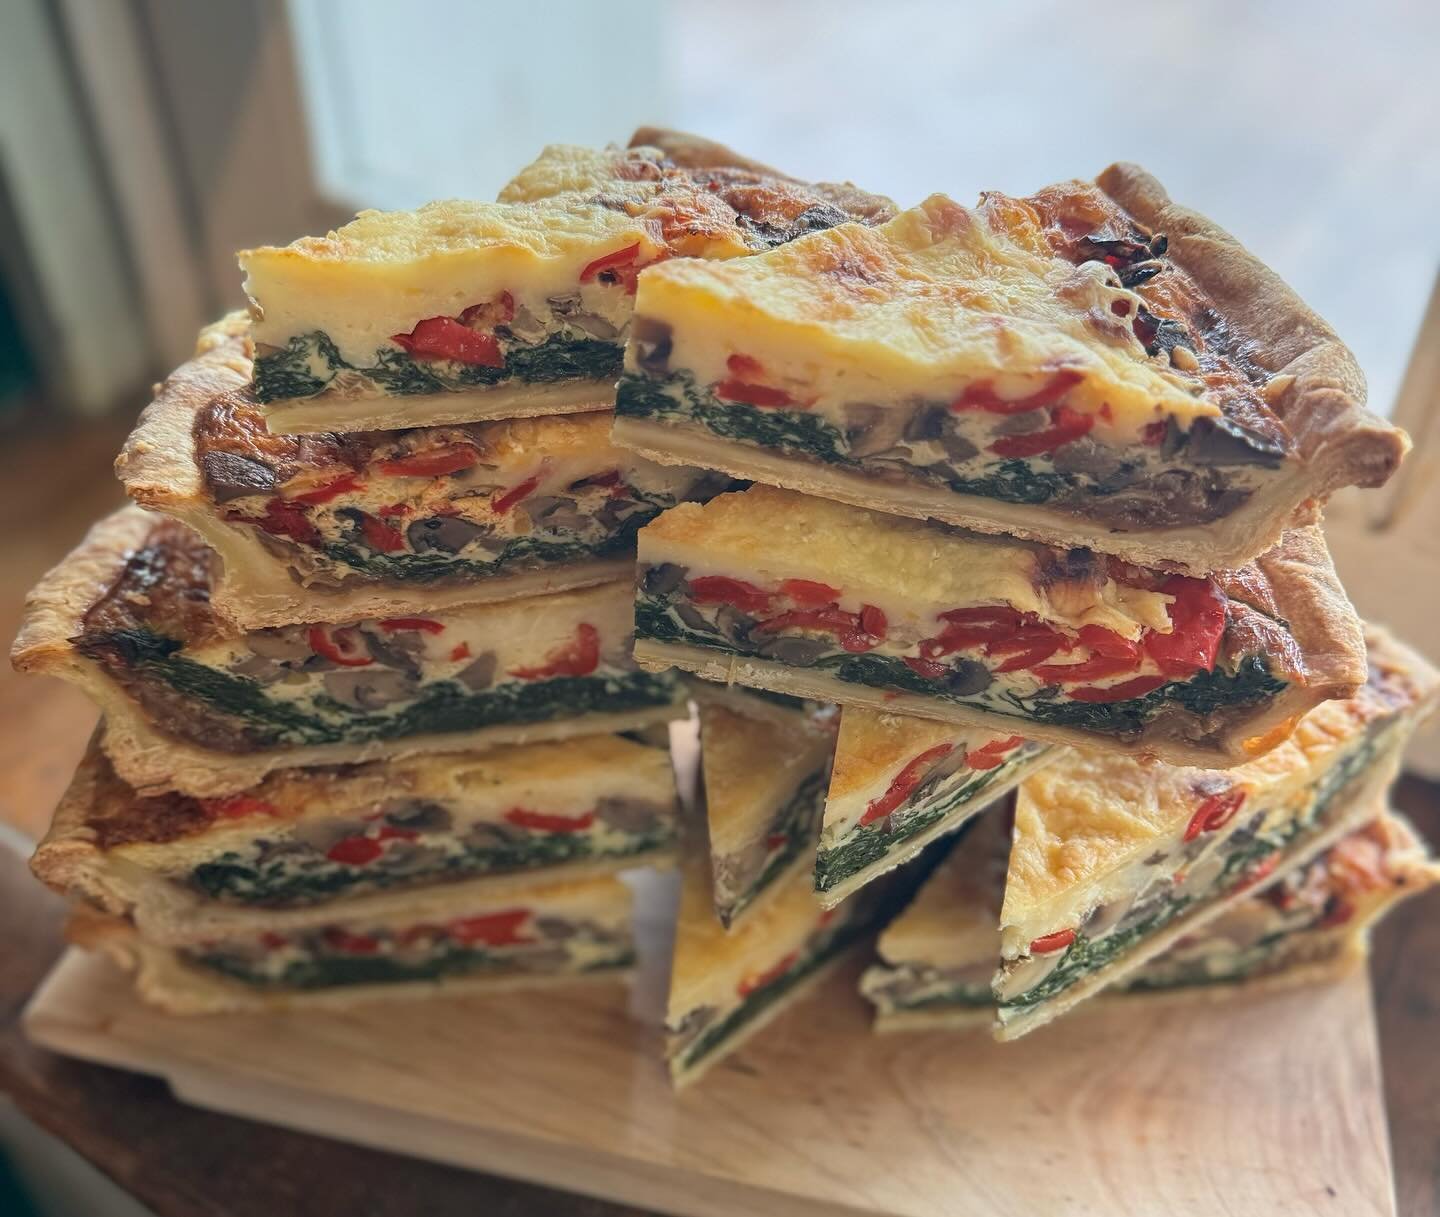 Do you love our veggie tart as much as we do? All those veggies and cheesy goodness are hard to resist! 

Enjoy a slice warmed up today or take a few Togo! 🧅🫑🥬🌶️🥚🧀